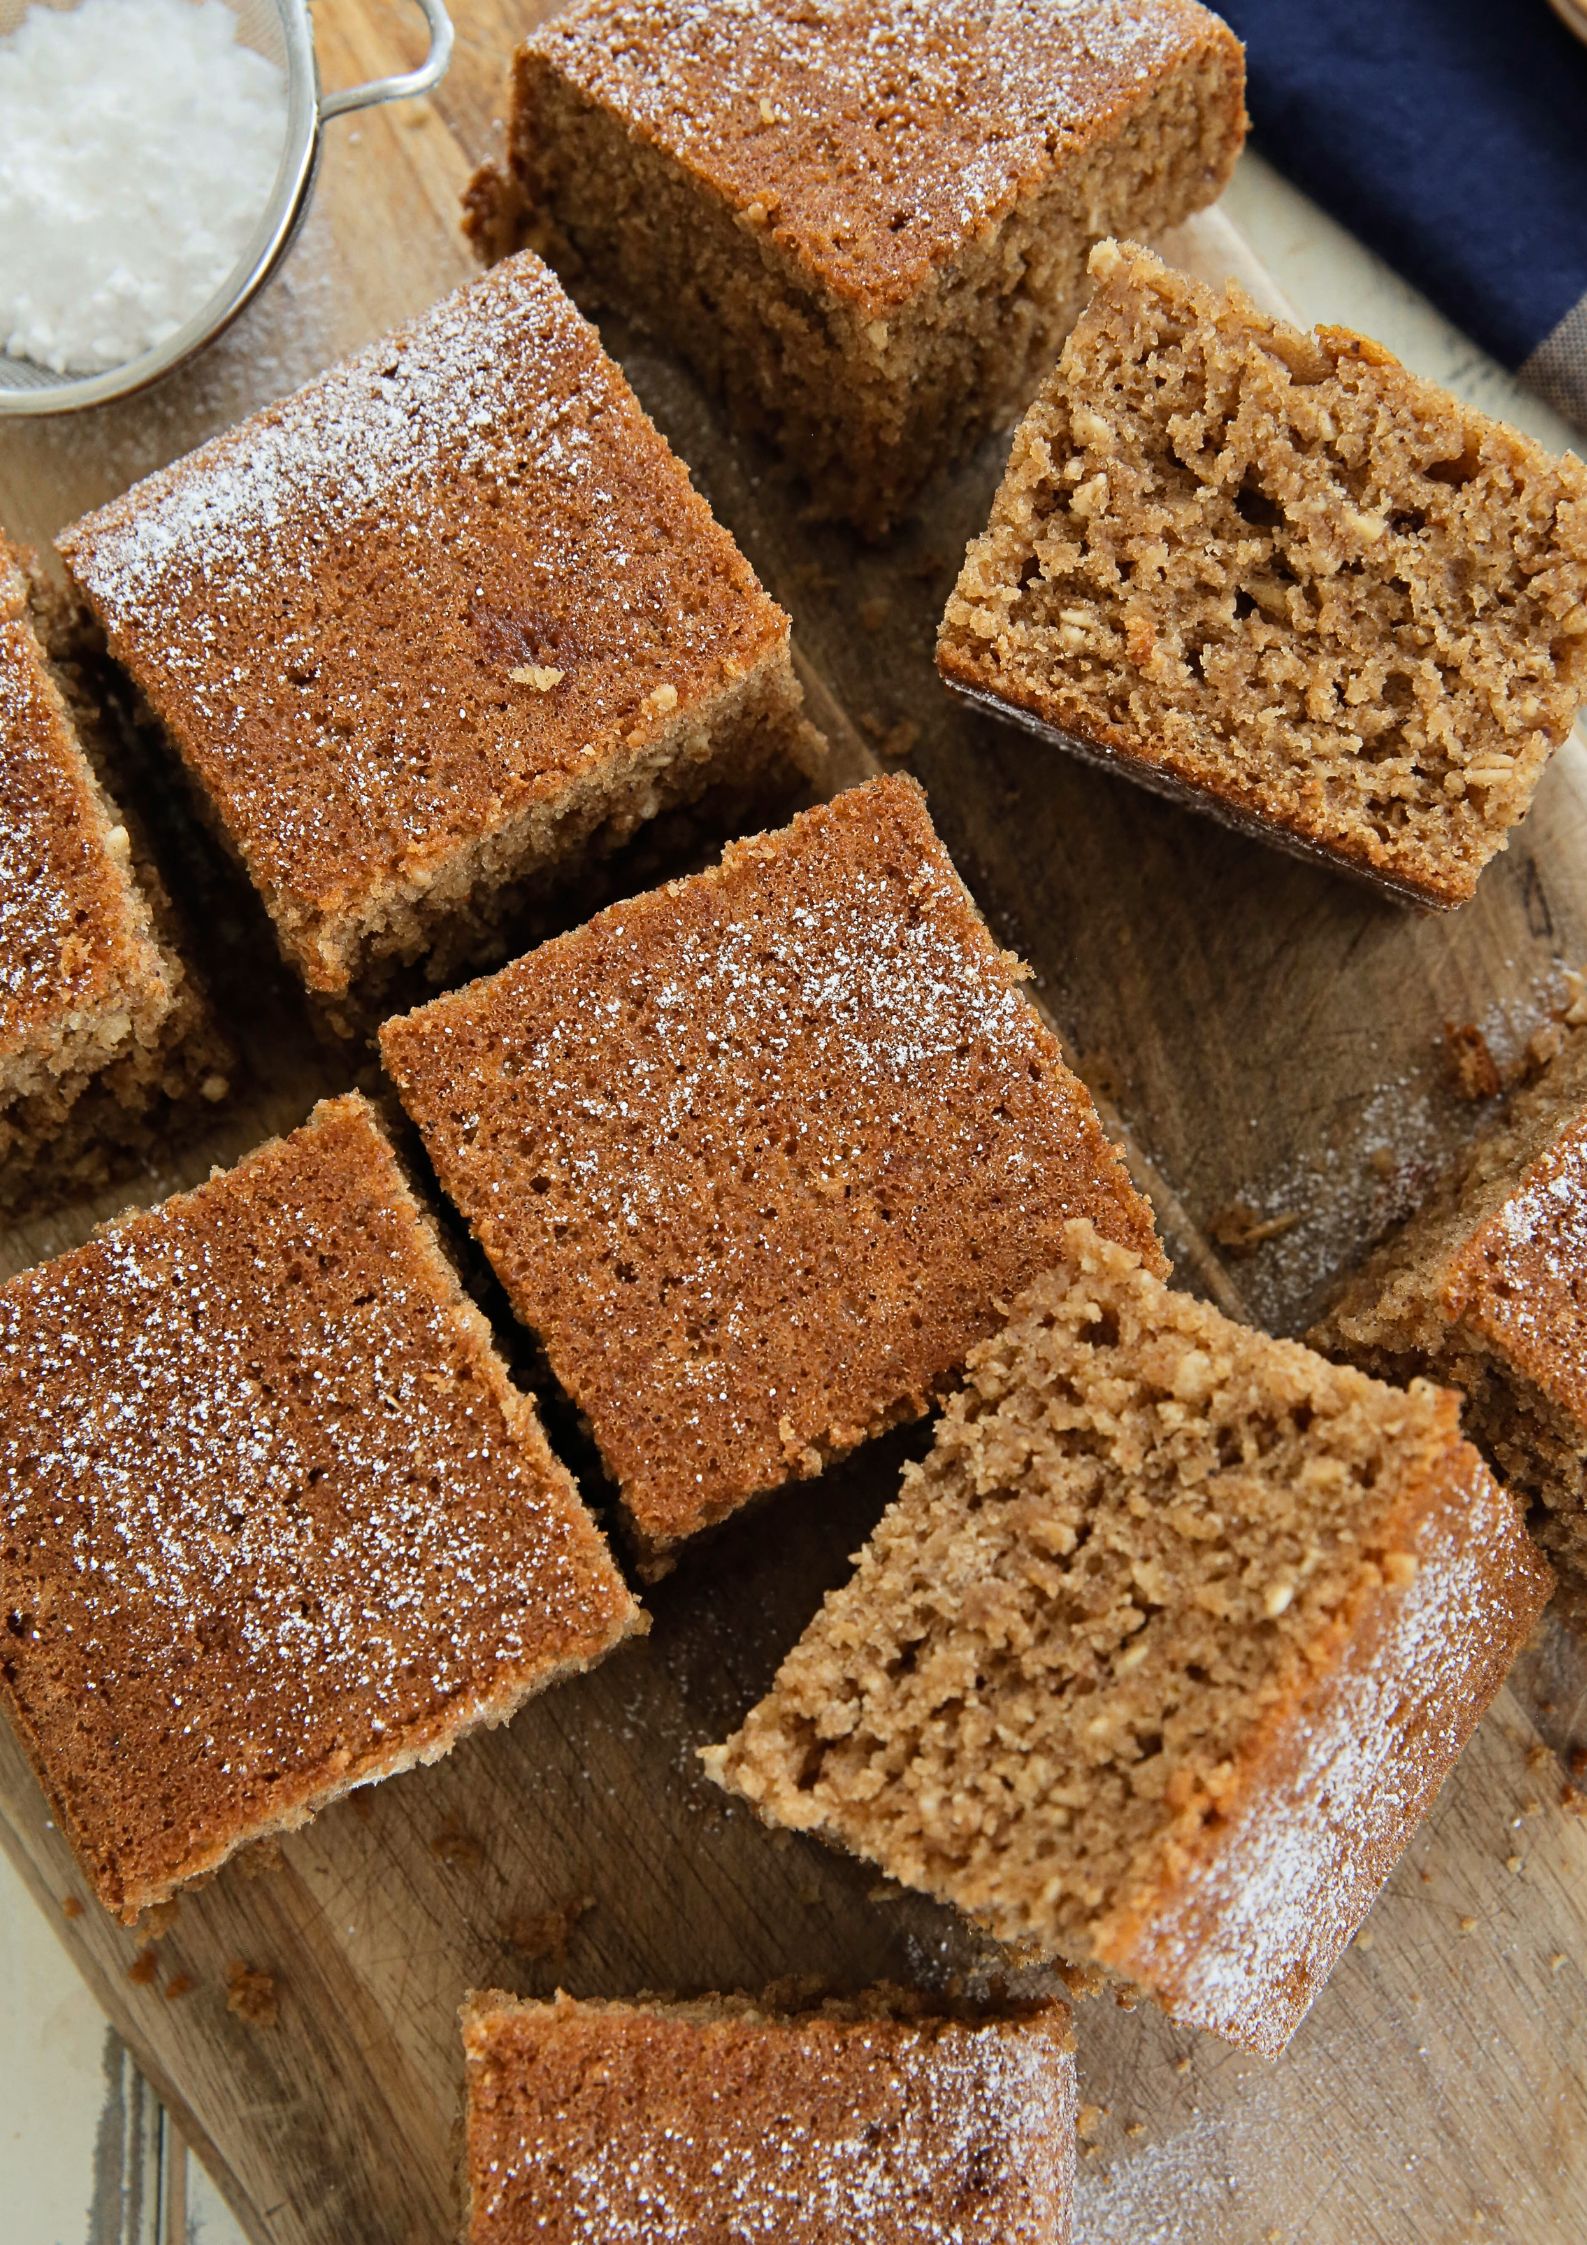 A traditional cake often made for Bonfire Night celebrations in the UK, Parkin is a deliciously moist spiced ginger cake made with oats and dark brown sugar | Recipe on the cookandhim.com #vegancake #bonfirenightfood #parkin #gingercake #spicecake